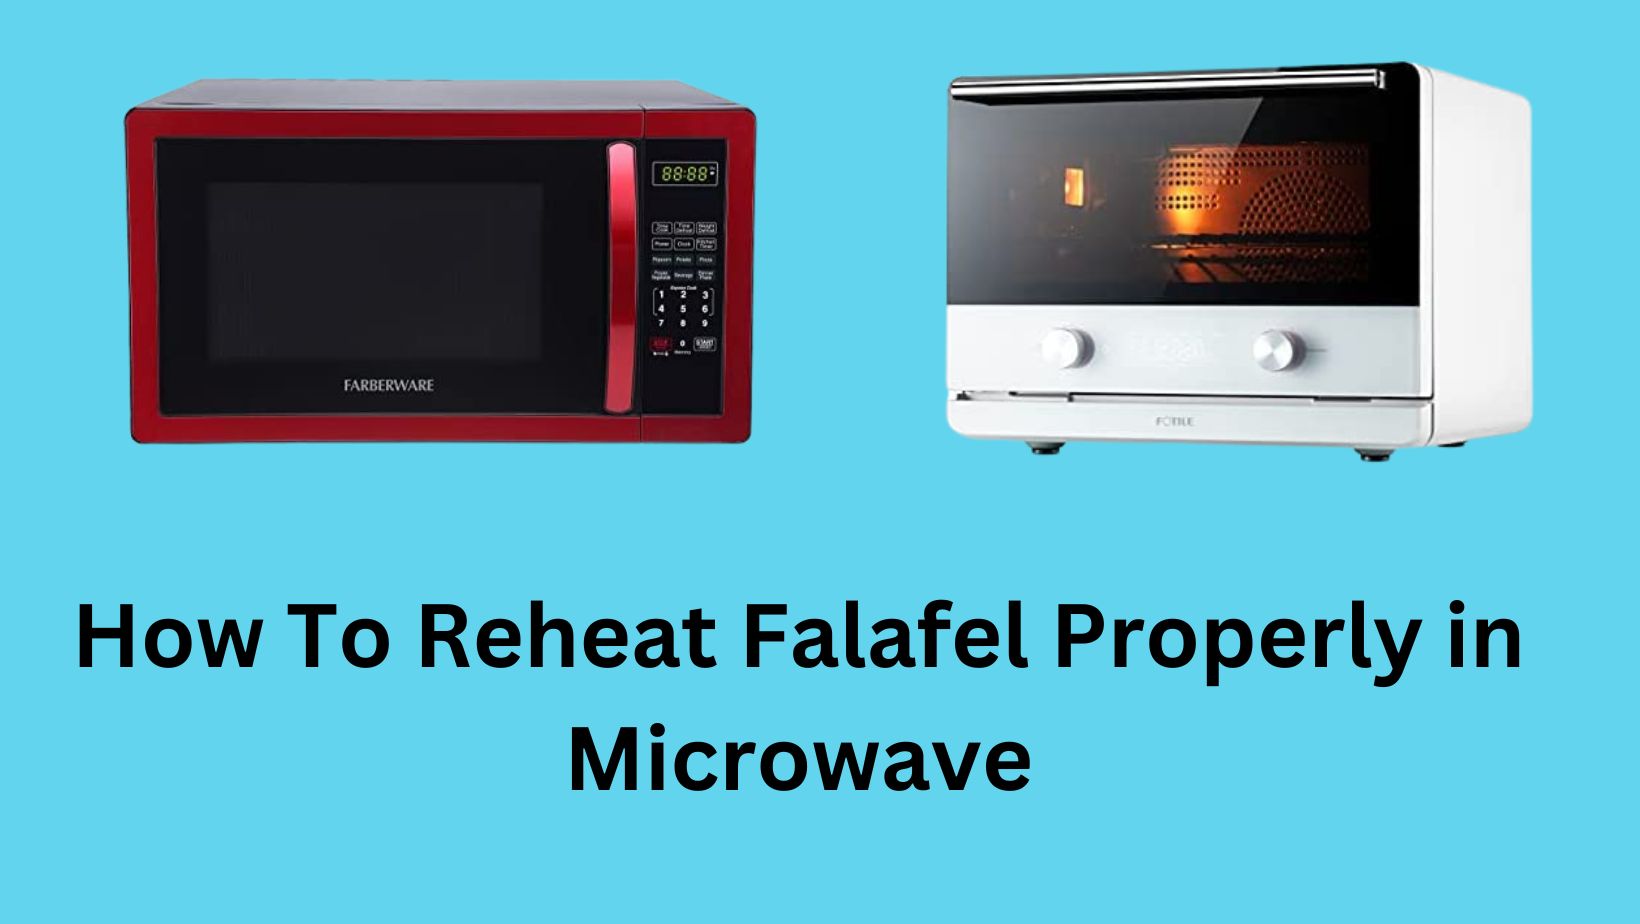 How To Reheat Falafel Properly in Microwave